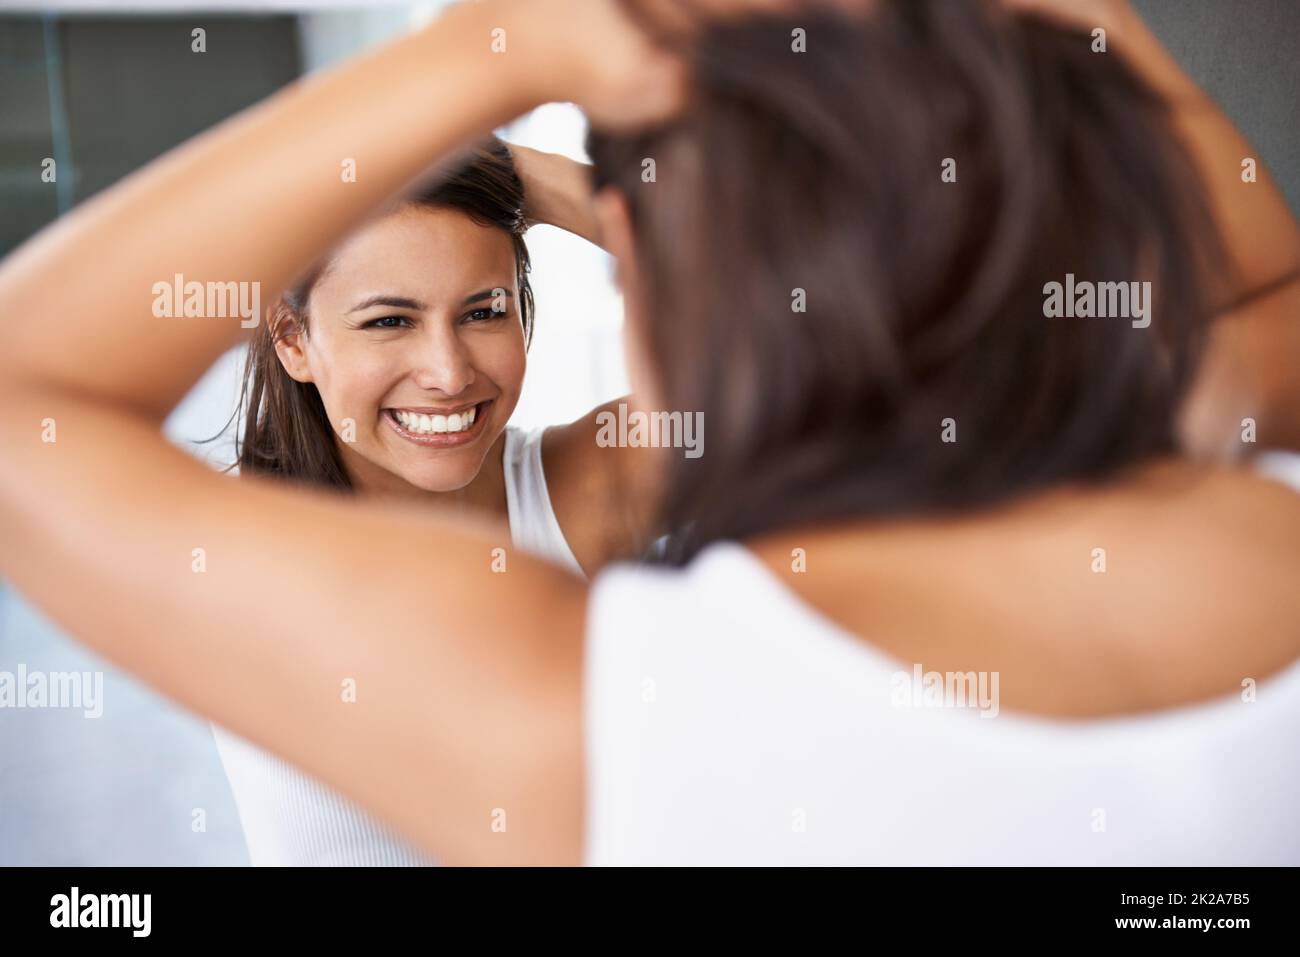 Getting ready is half the funof going out. A cropped shot of a happy young woman deciding on a hair style in front of her bathroom mirror. Stock Photo